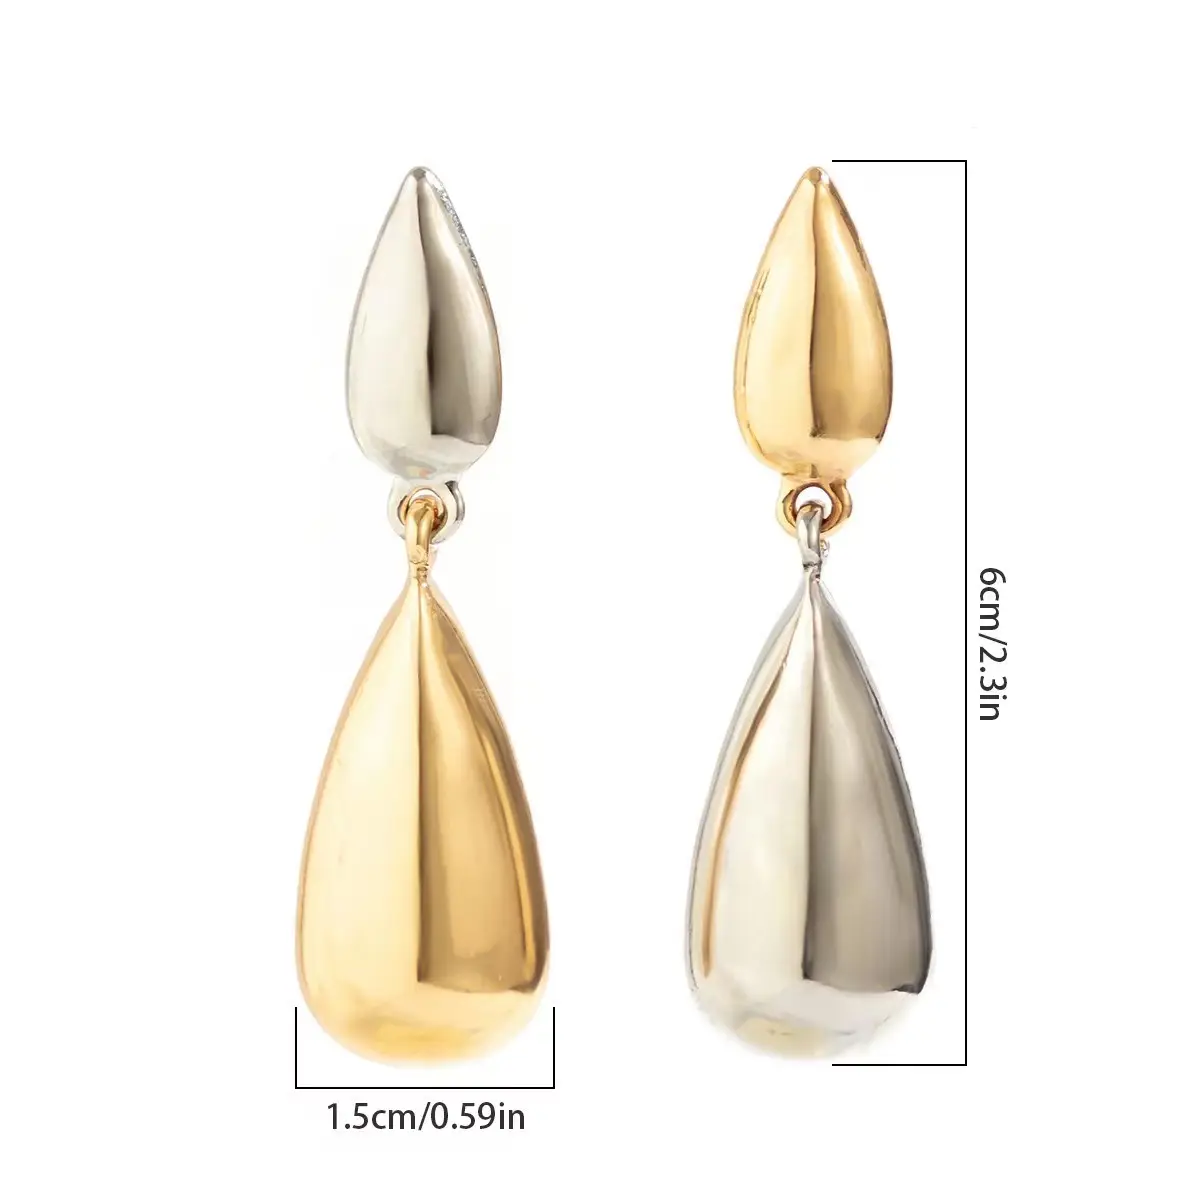 Wholesale Creative Wate Drop Design 18k Gold Silver Plated Geometric Hanging Tassel Earring Stainless Steel Statement Jewelry